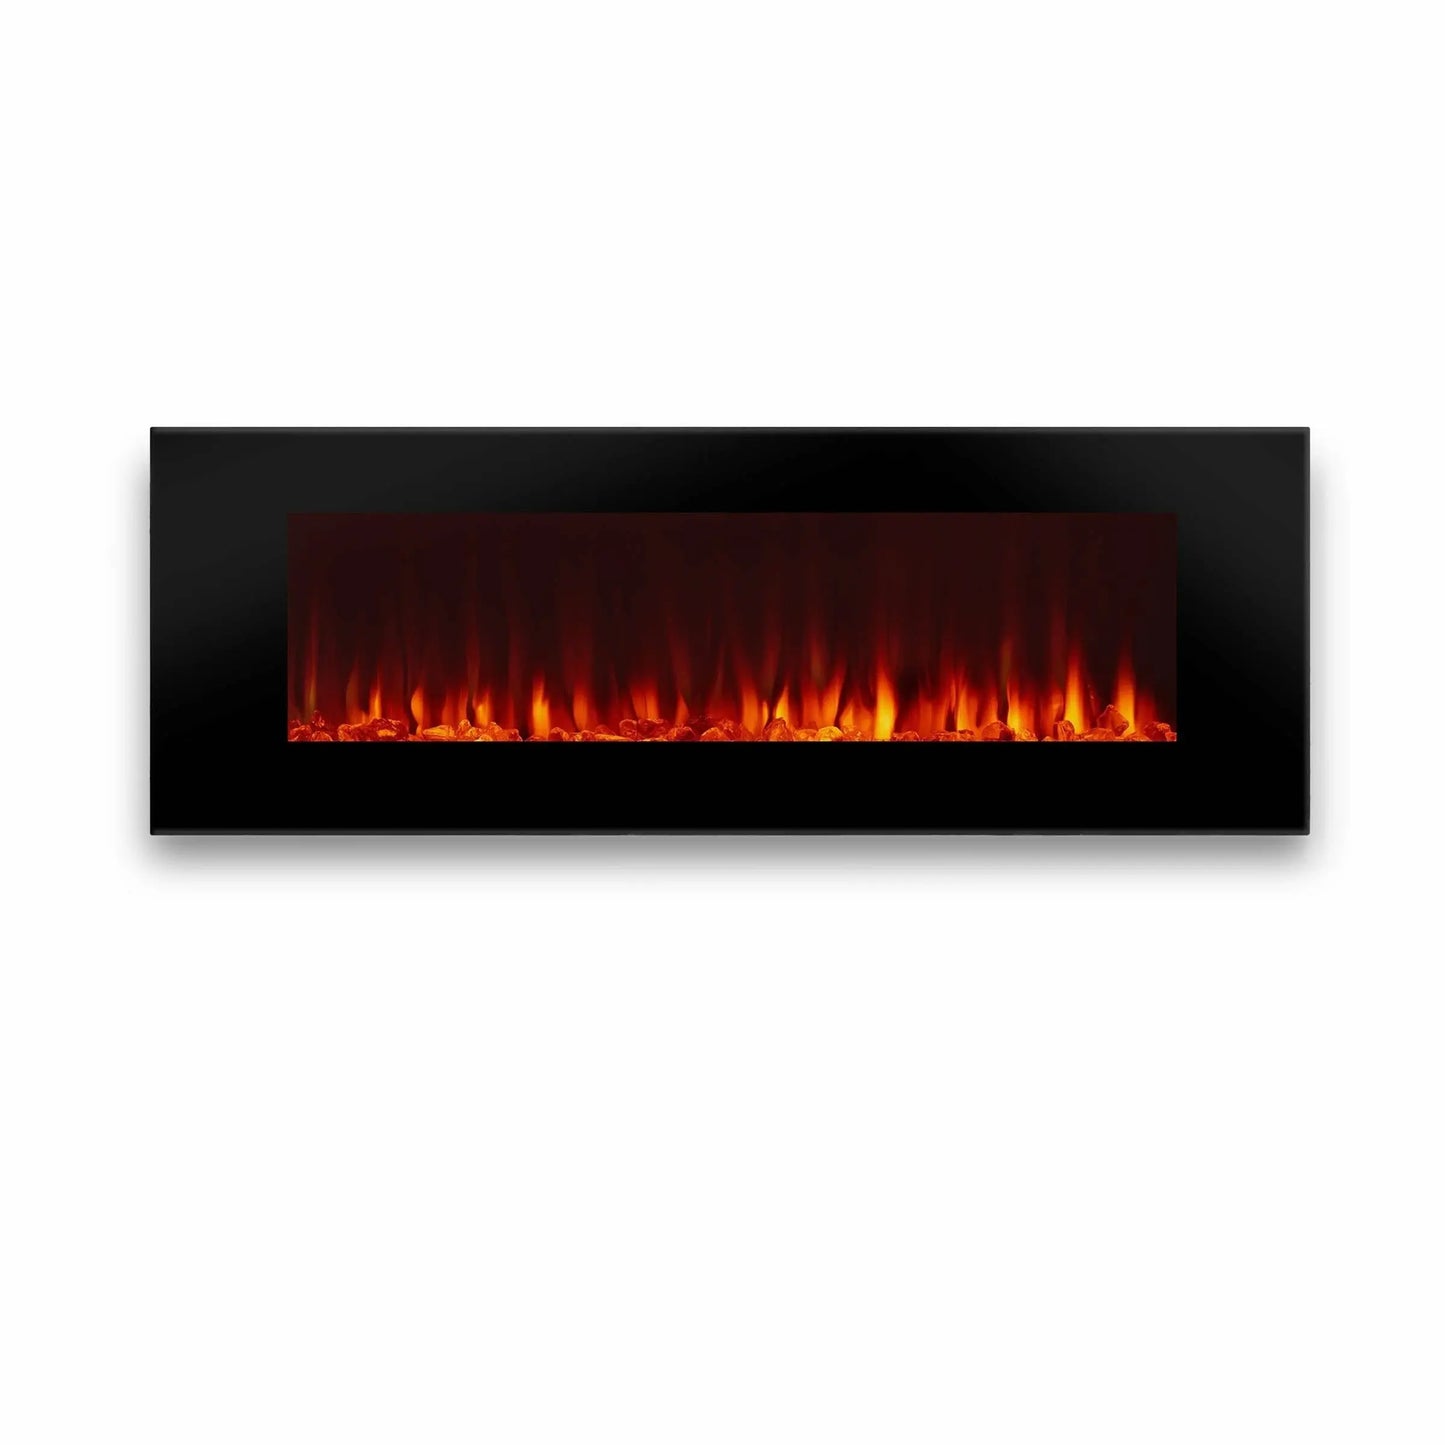 DiNatale Wall-mounted Electric Fireplace Multipl Colors & Sizes Real Flame